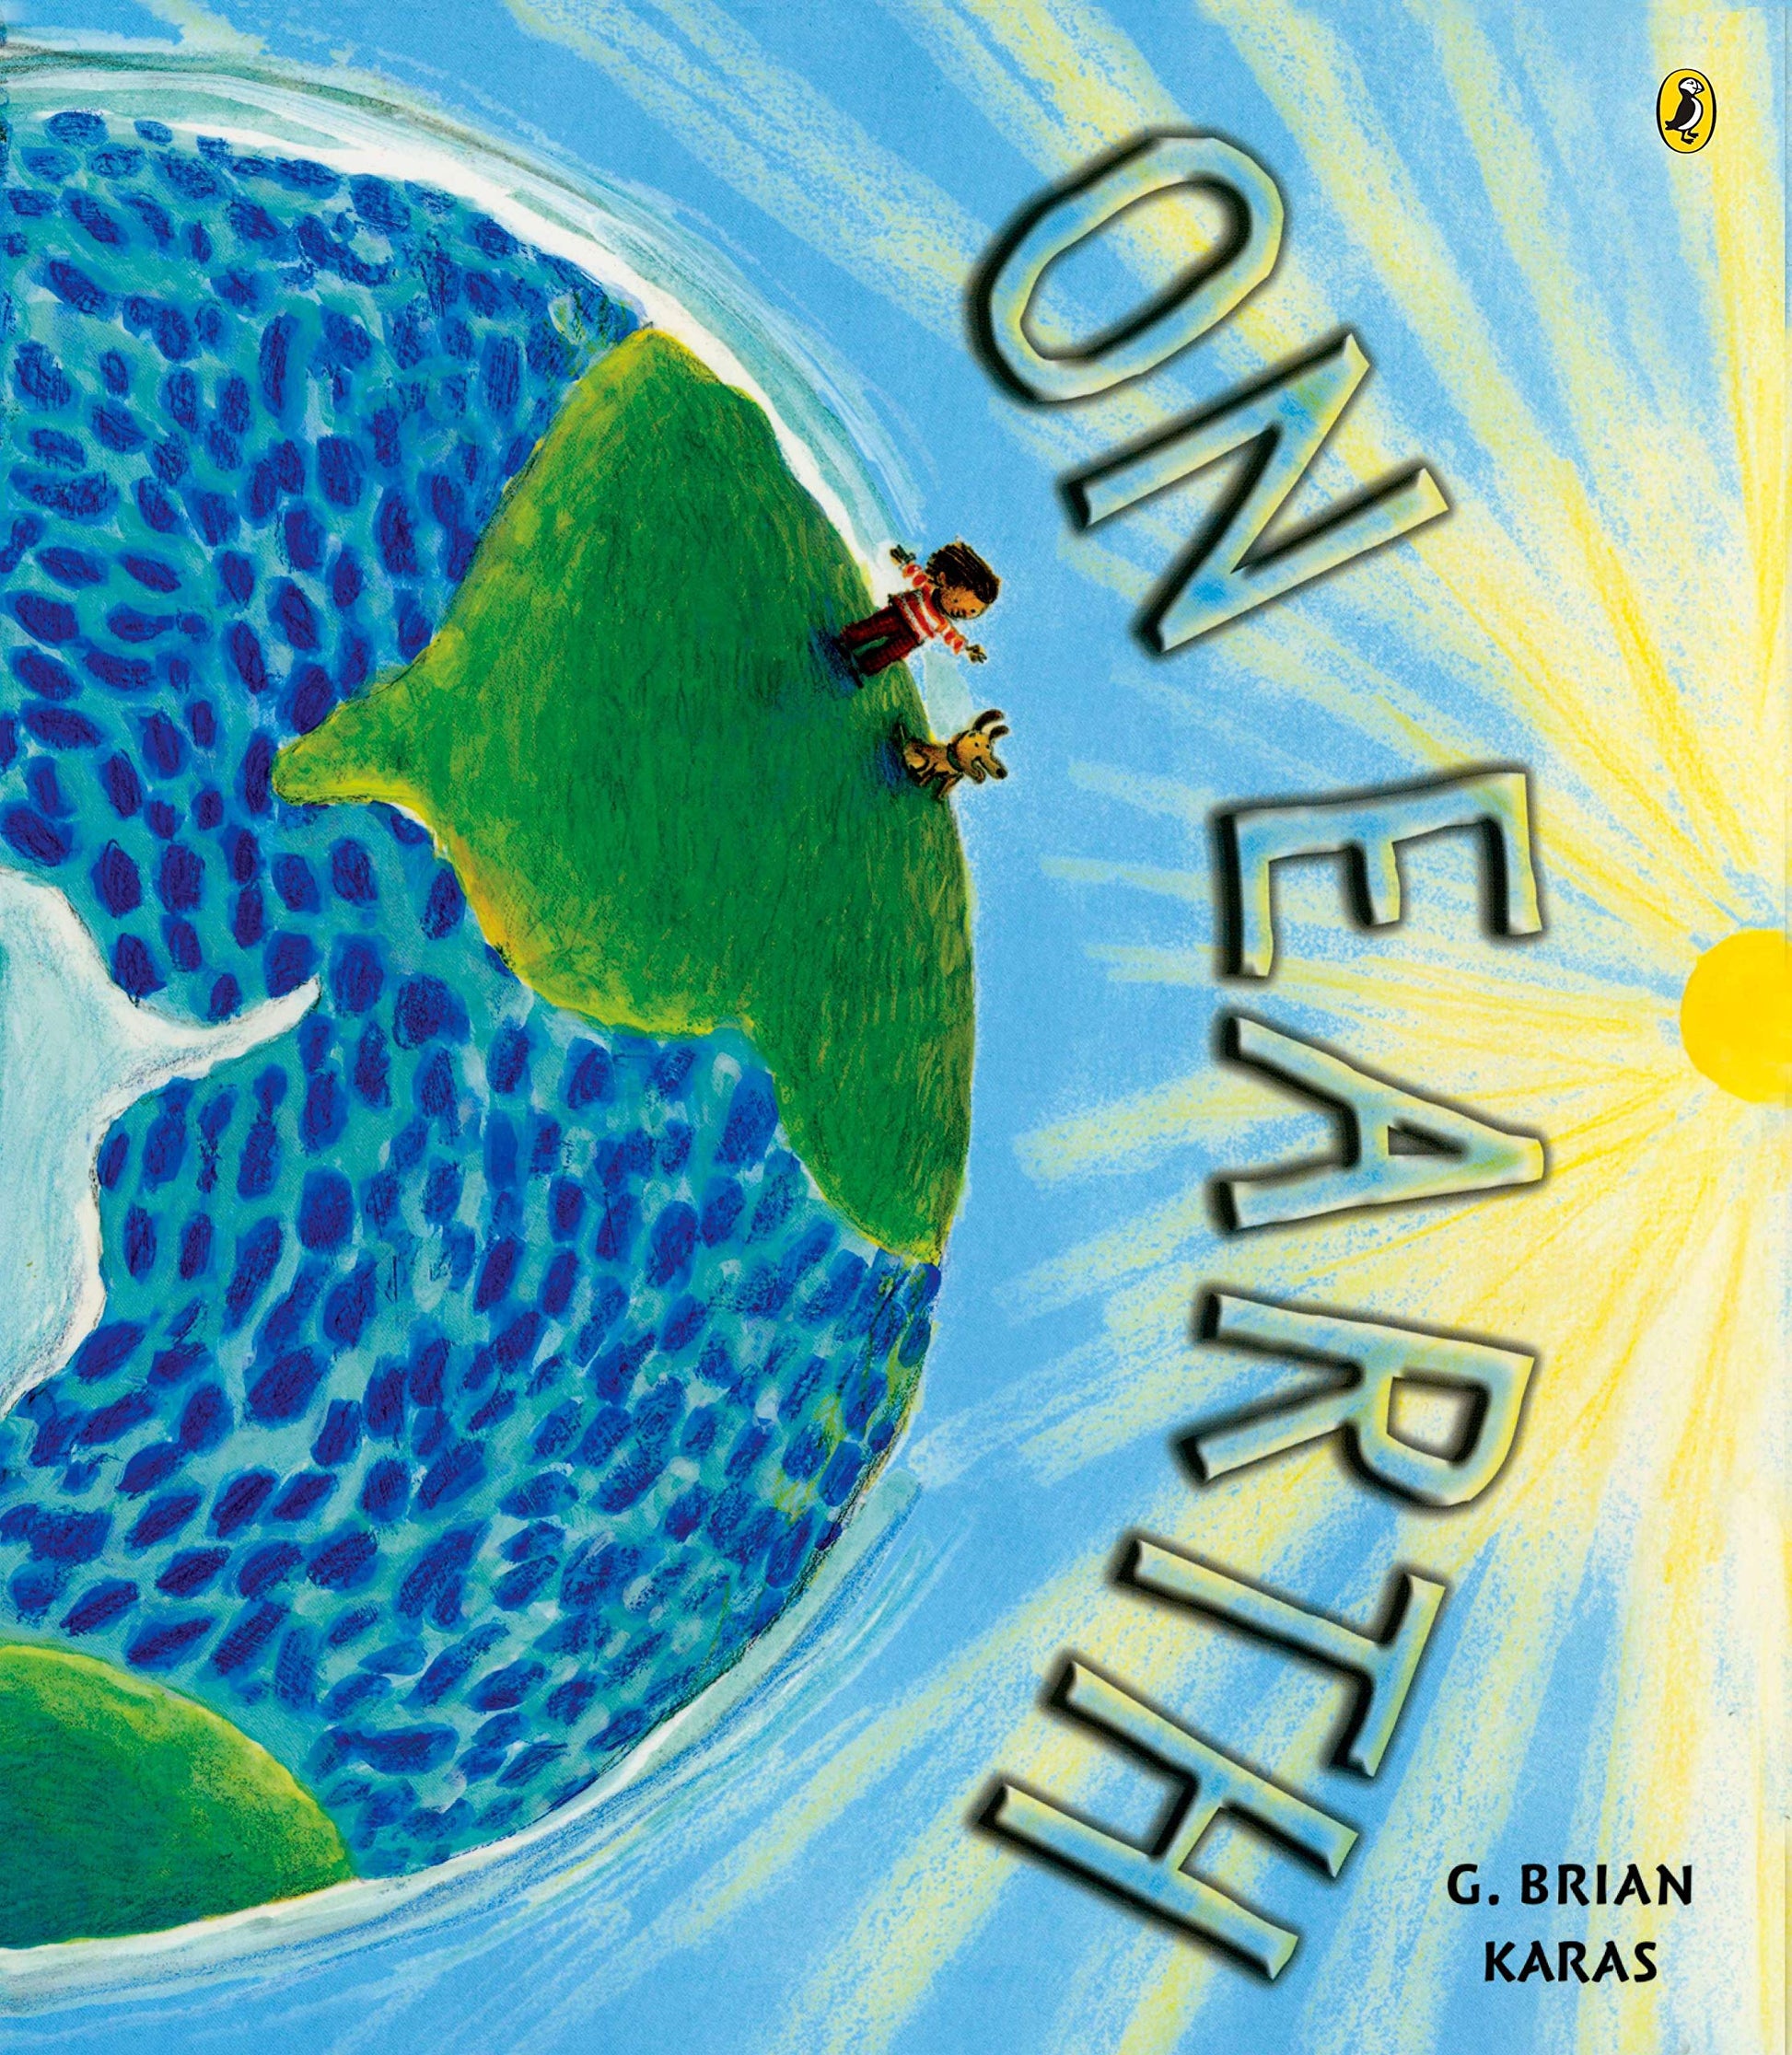 Children's book about the Earth